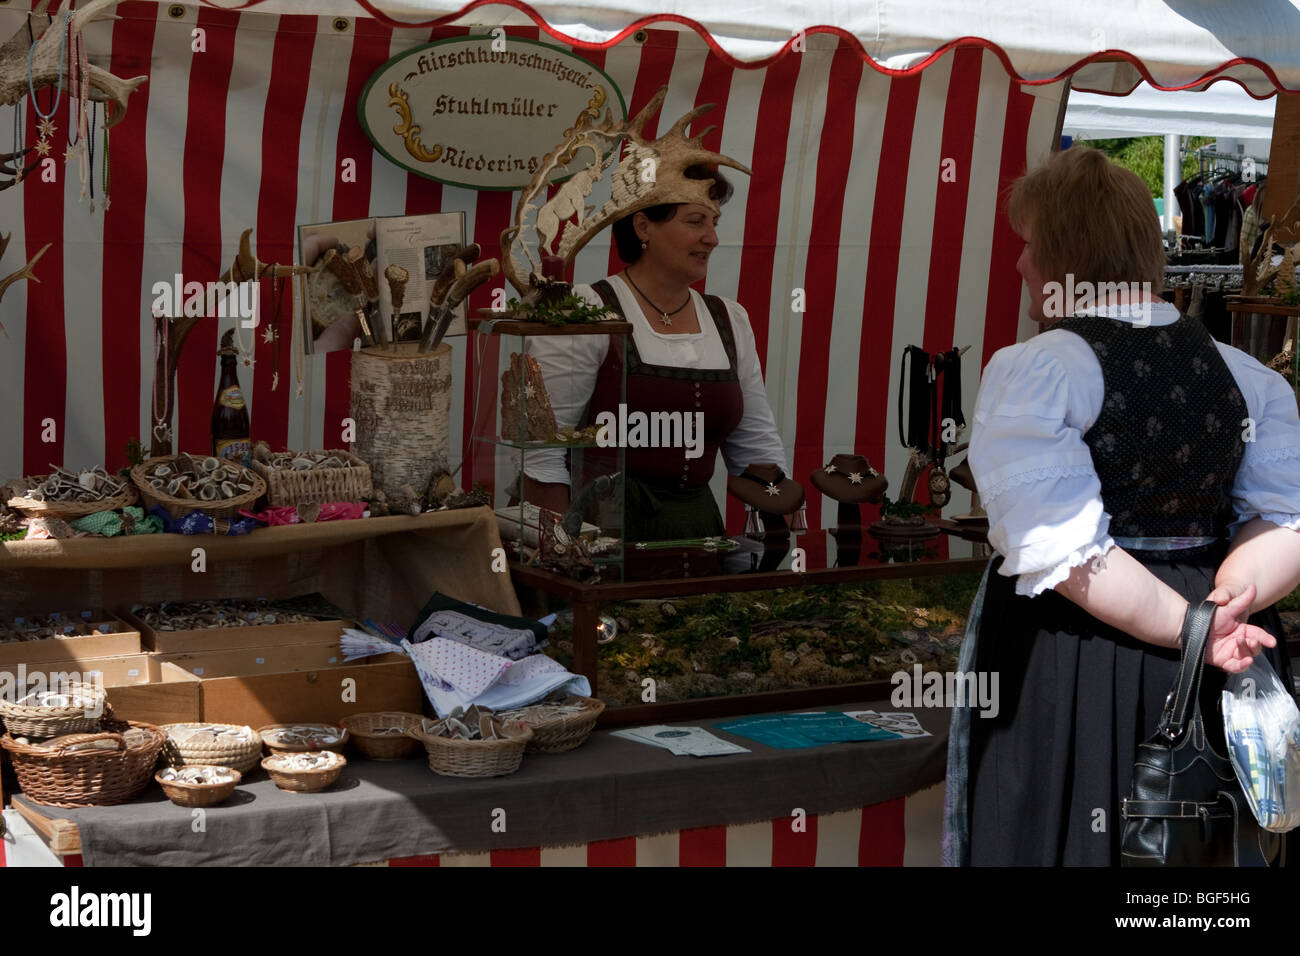 Customer buying articles from a stall in Bavaria in Southern Germany Stock Photo